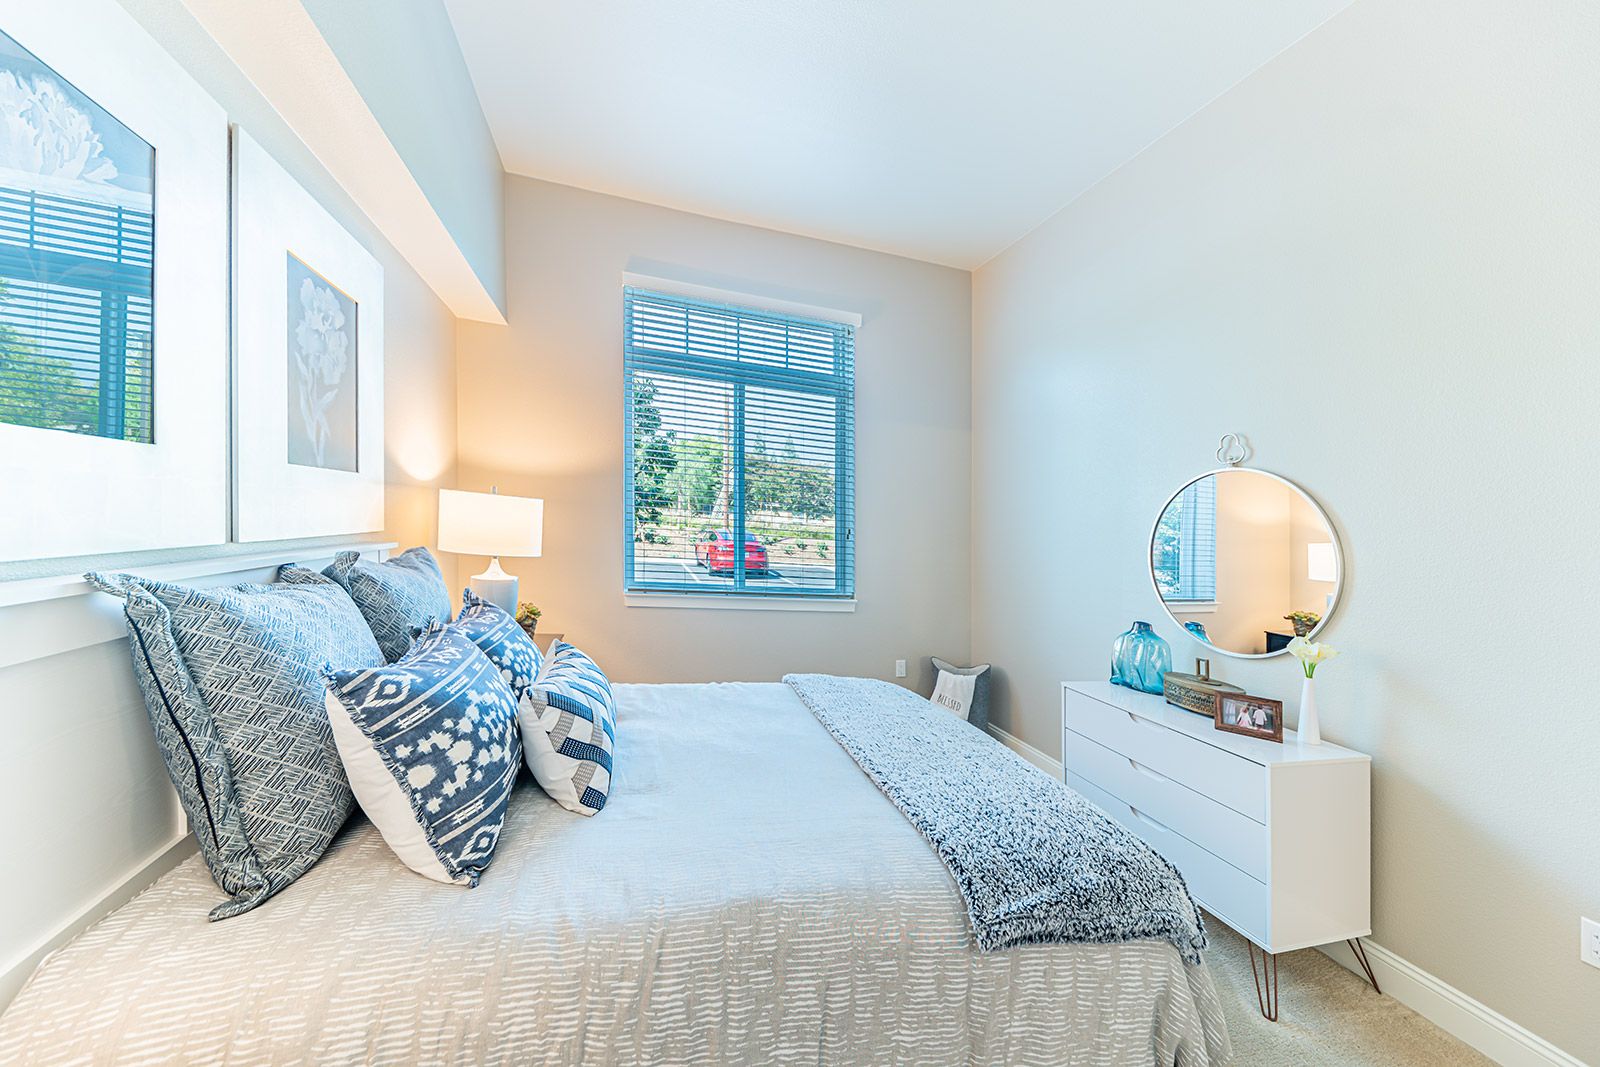 Interior view of a cozy bedroom at Allara Senior Living with stylish decor and furniture.